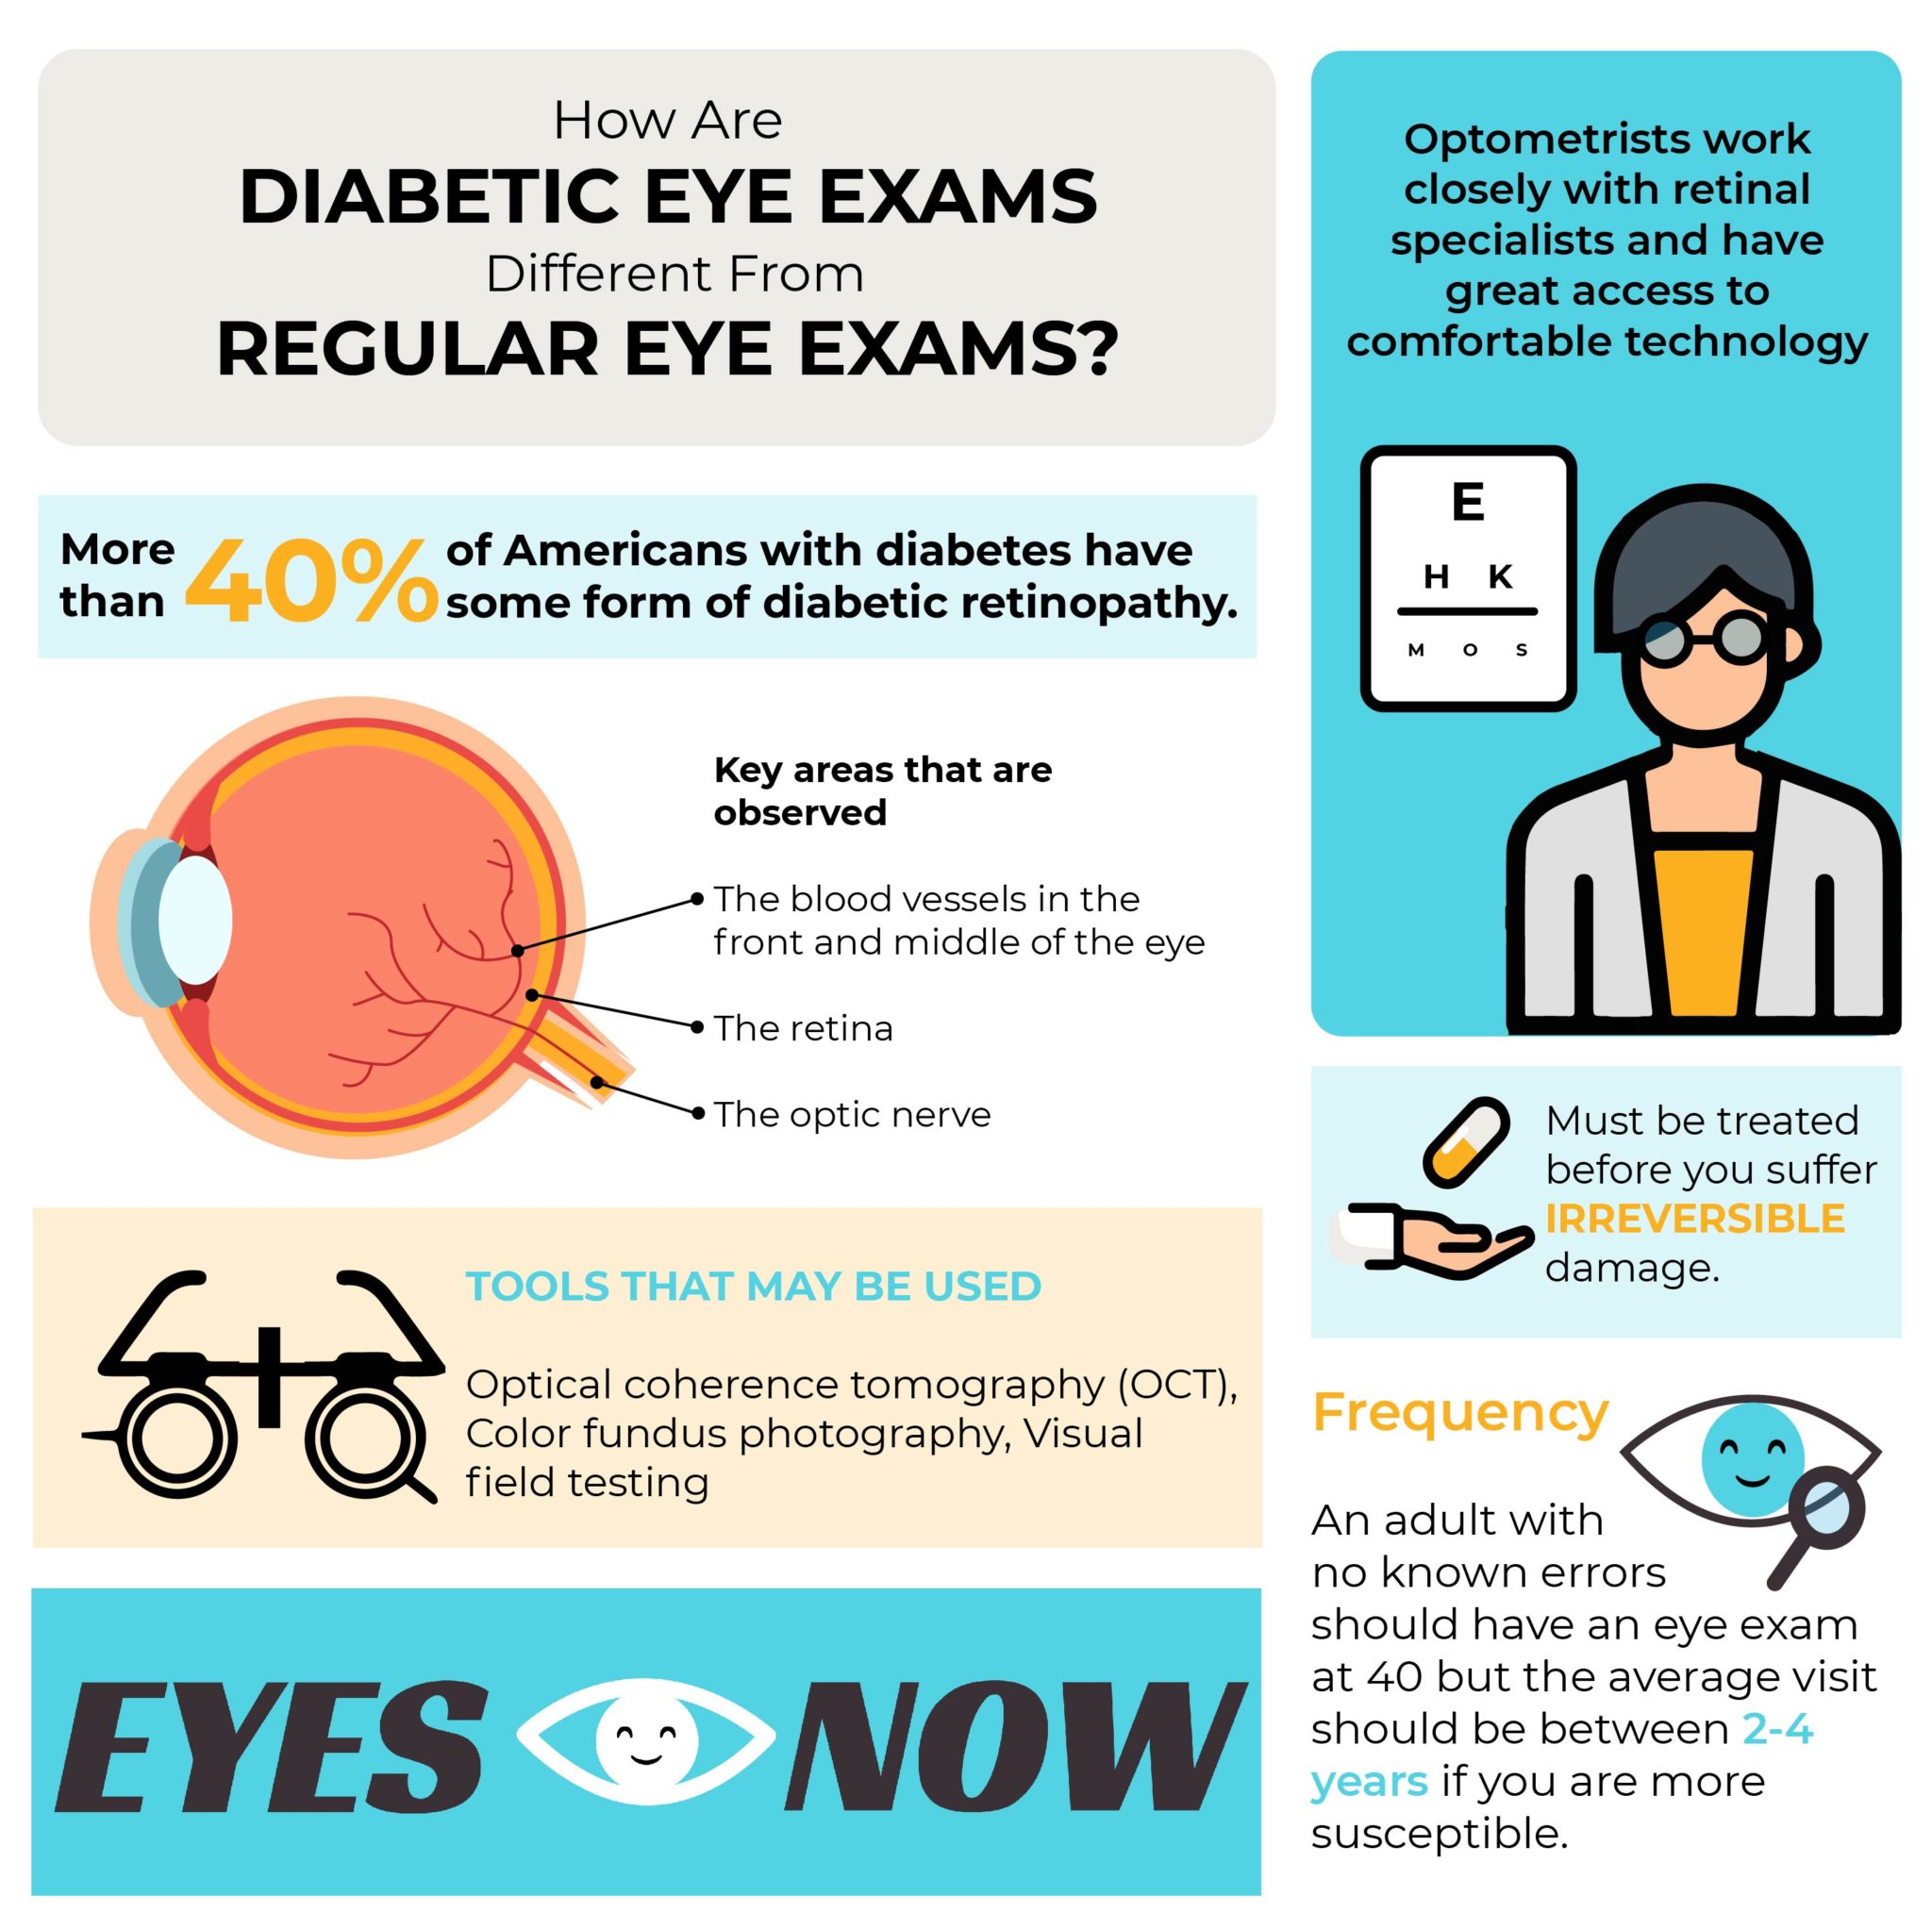 how-are-diabetic-eye-exams-different-from-regular-eye-exams